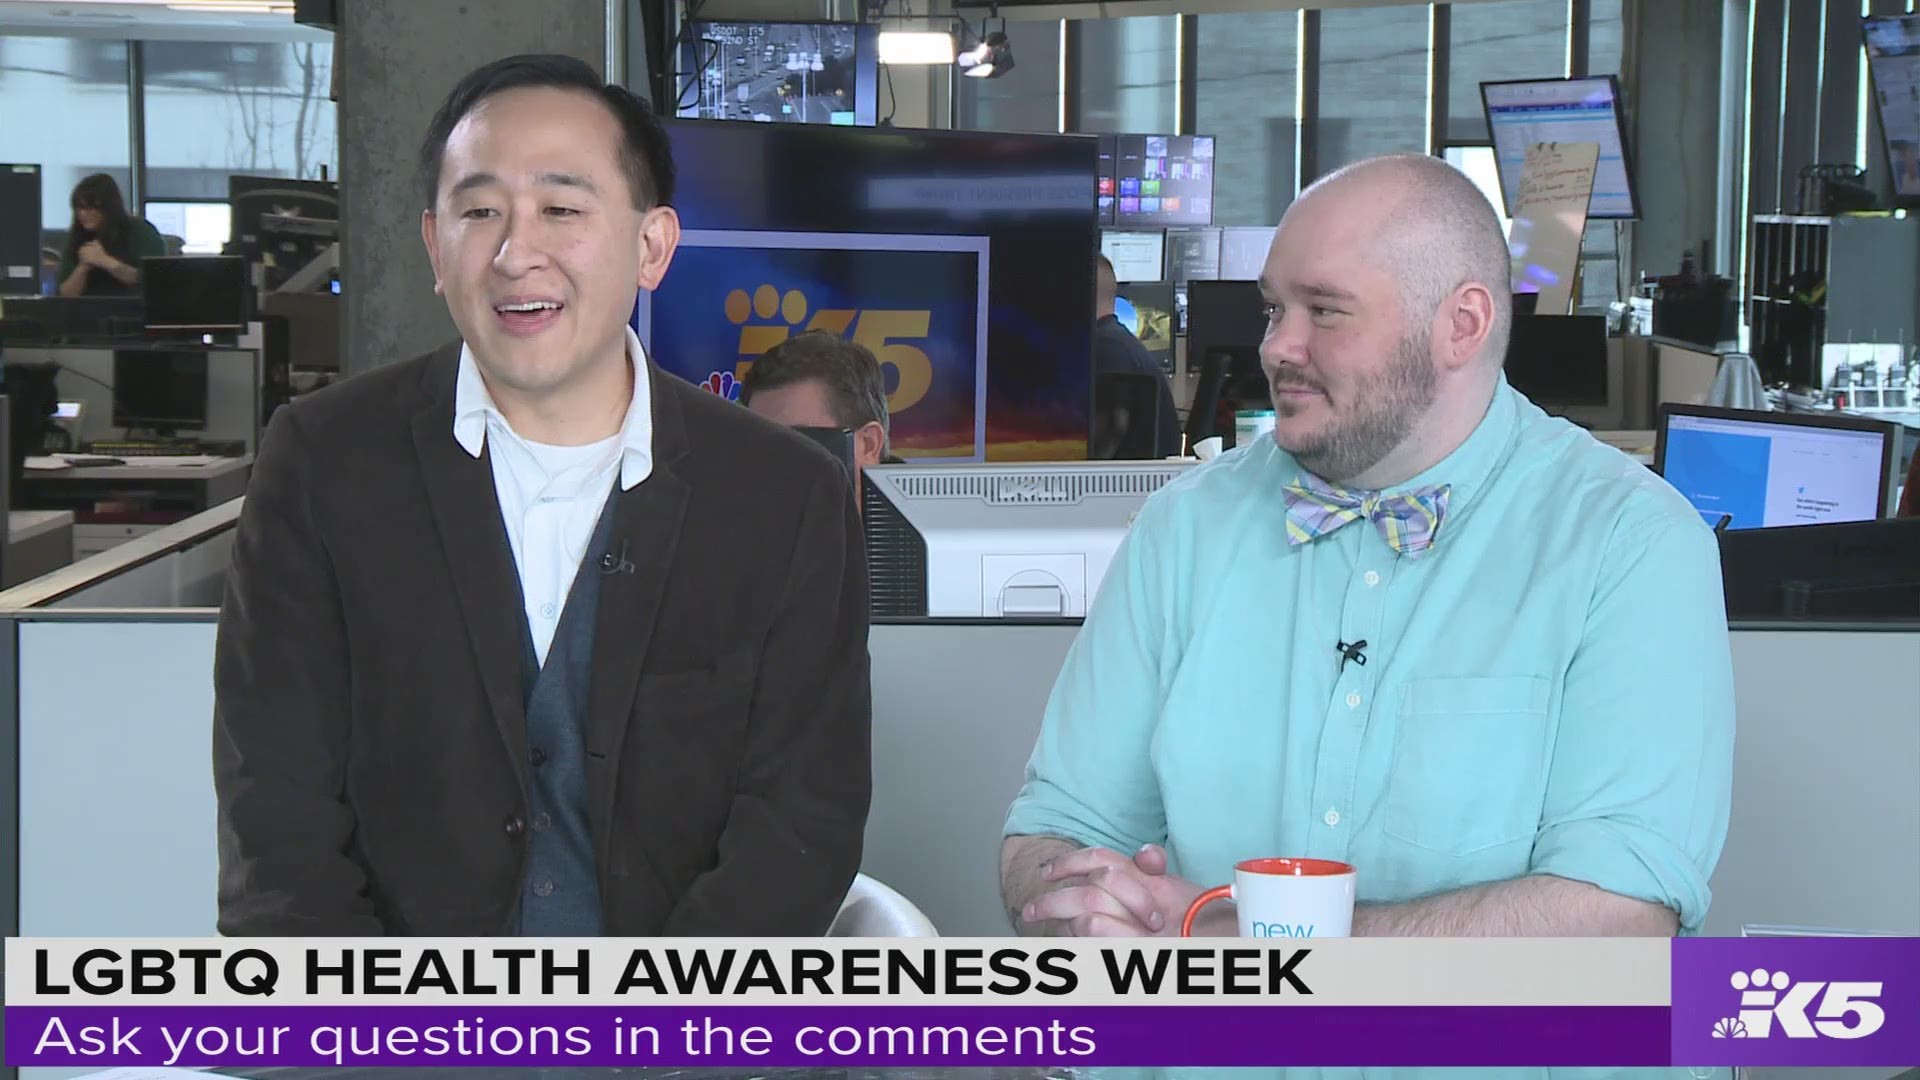 It's LGBT Health Awareness Week and Margaret Larson was LIVE with Dr. Kevin Wang and Connor Wesley, RN from Swedish Medical Center talking about LGBT health-care and recommendations for the medical community.